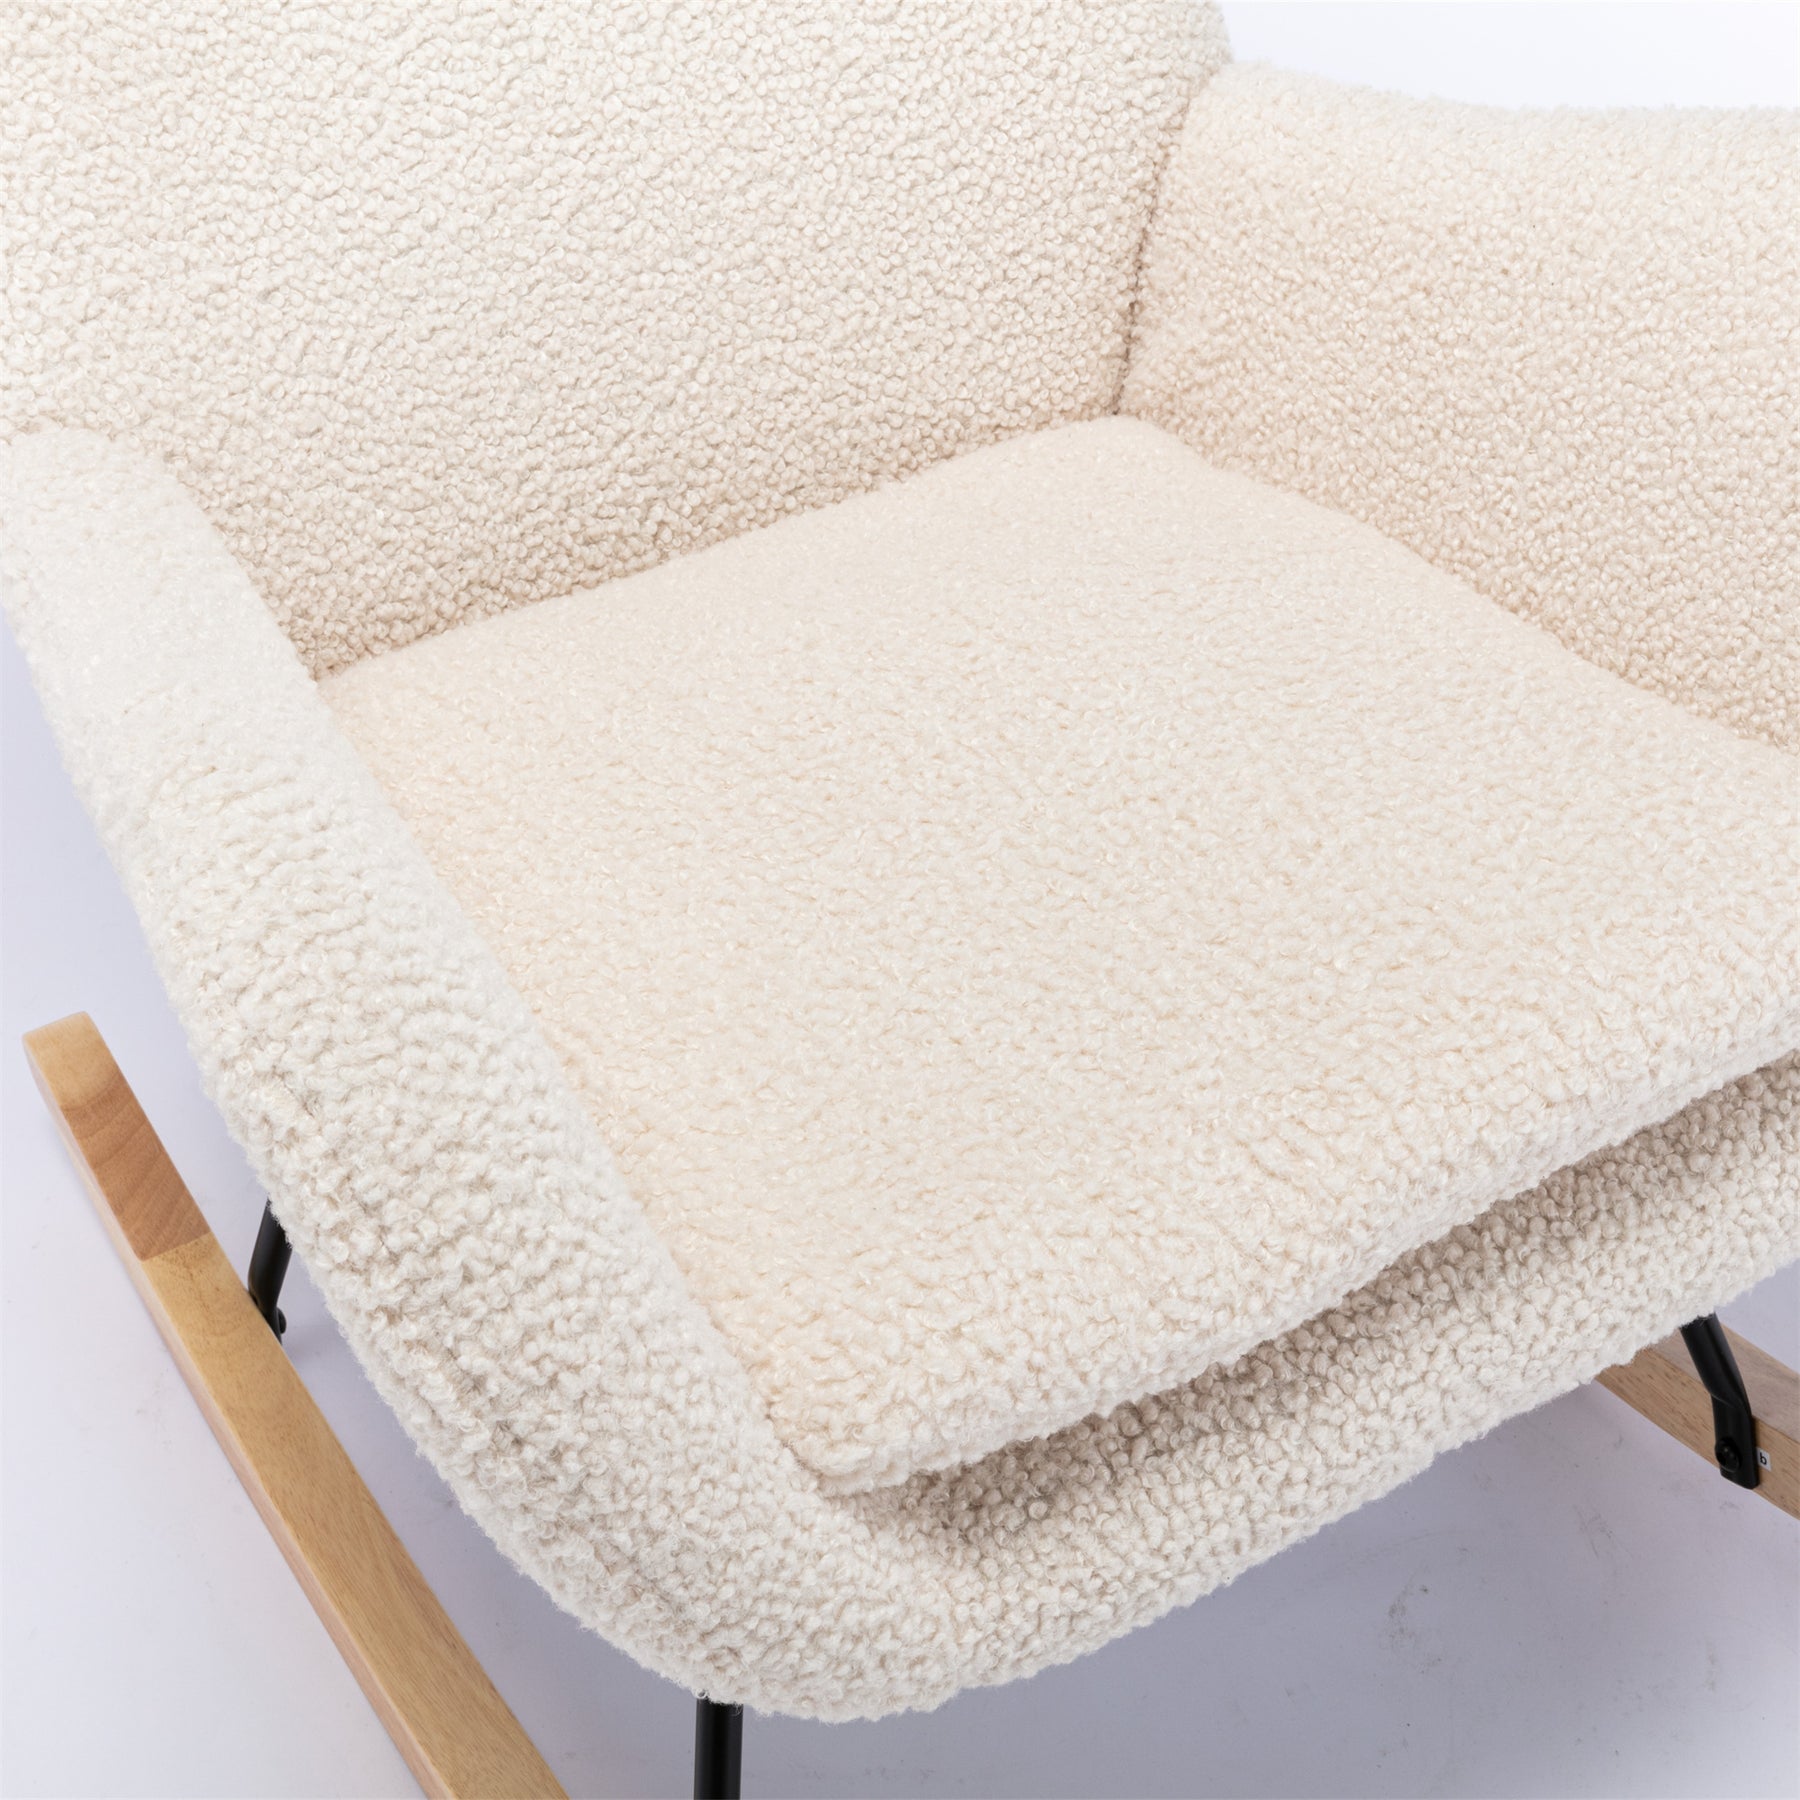 Teddy Fabric Padded Seat Rocking Chair With High Backrest And Armrests - Tonkn